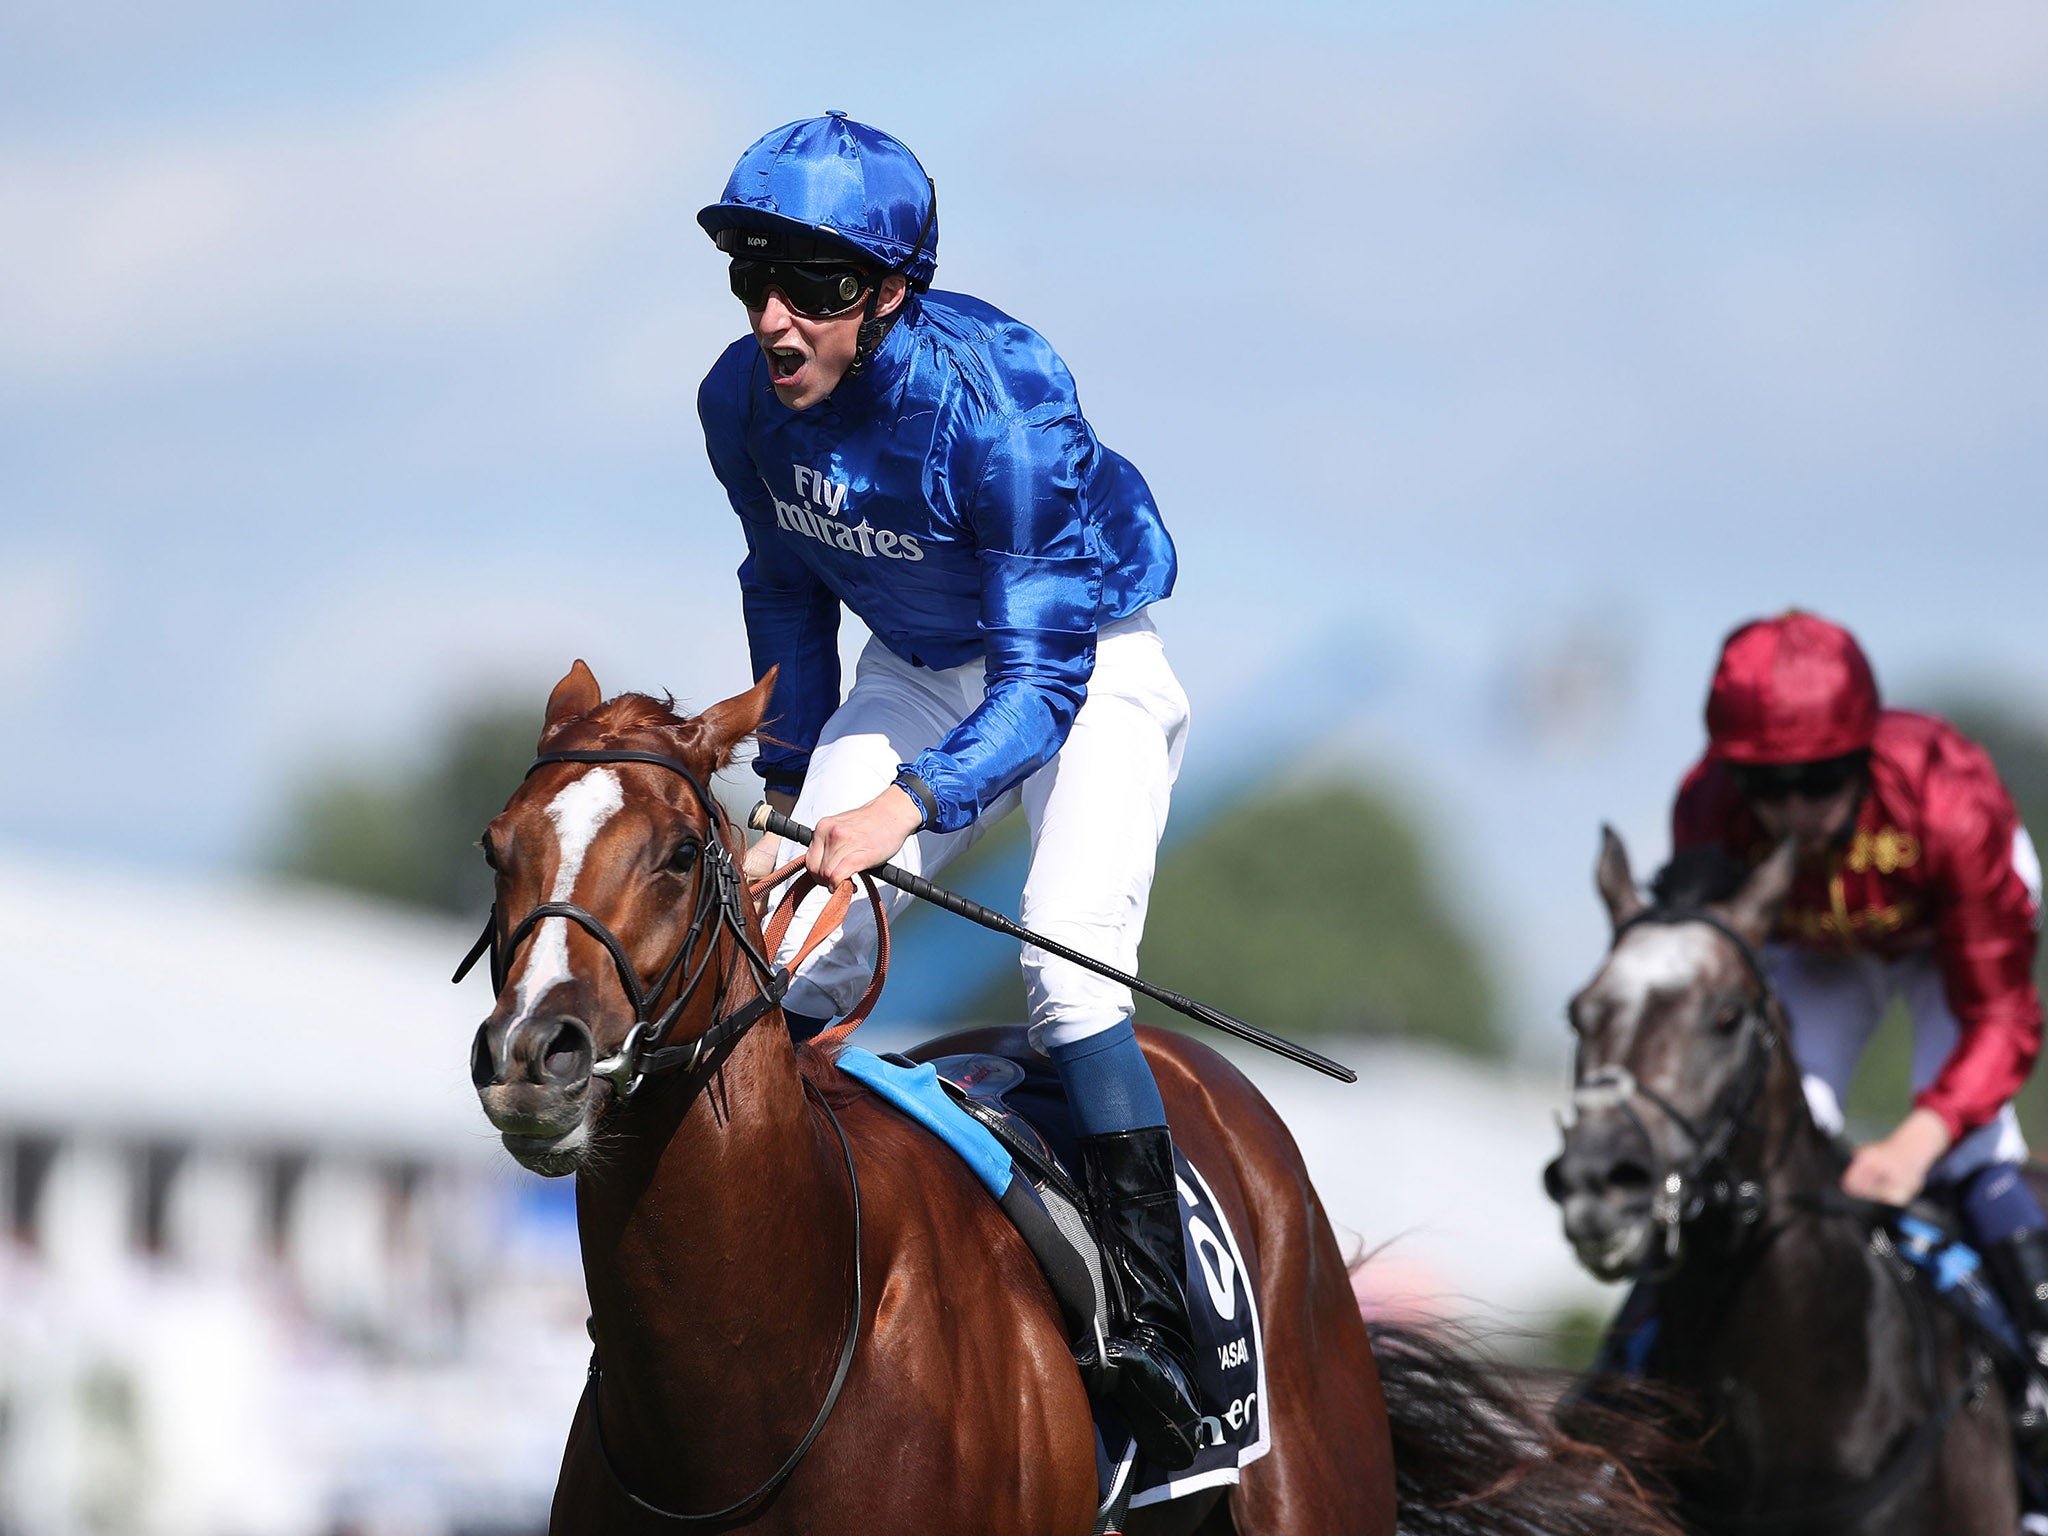 16-1 shot Masar caused an upset in Derby